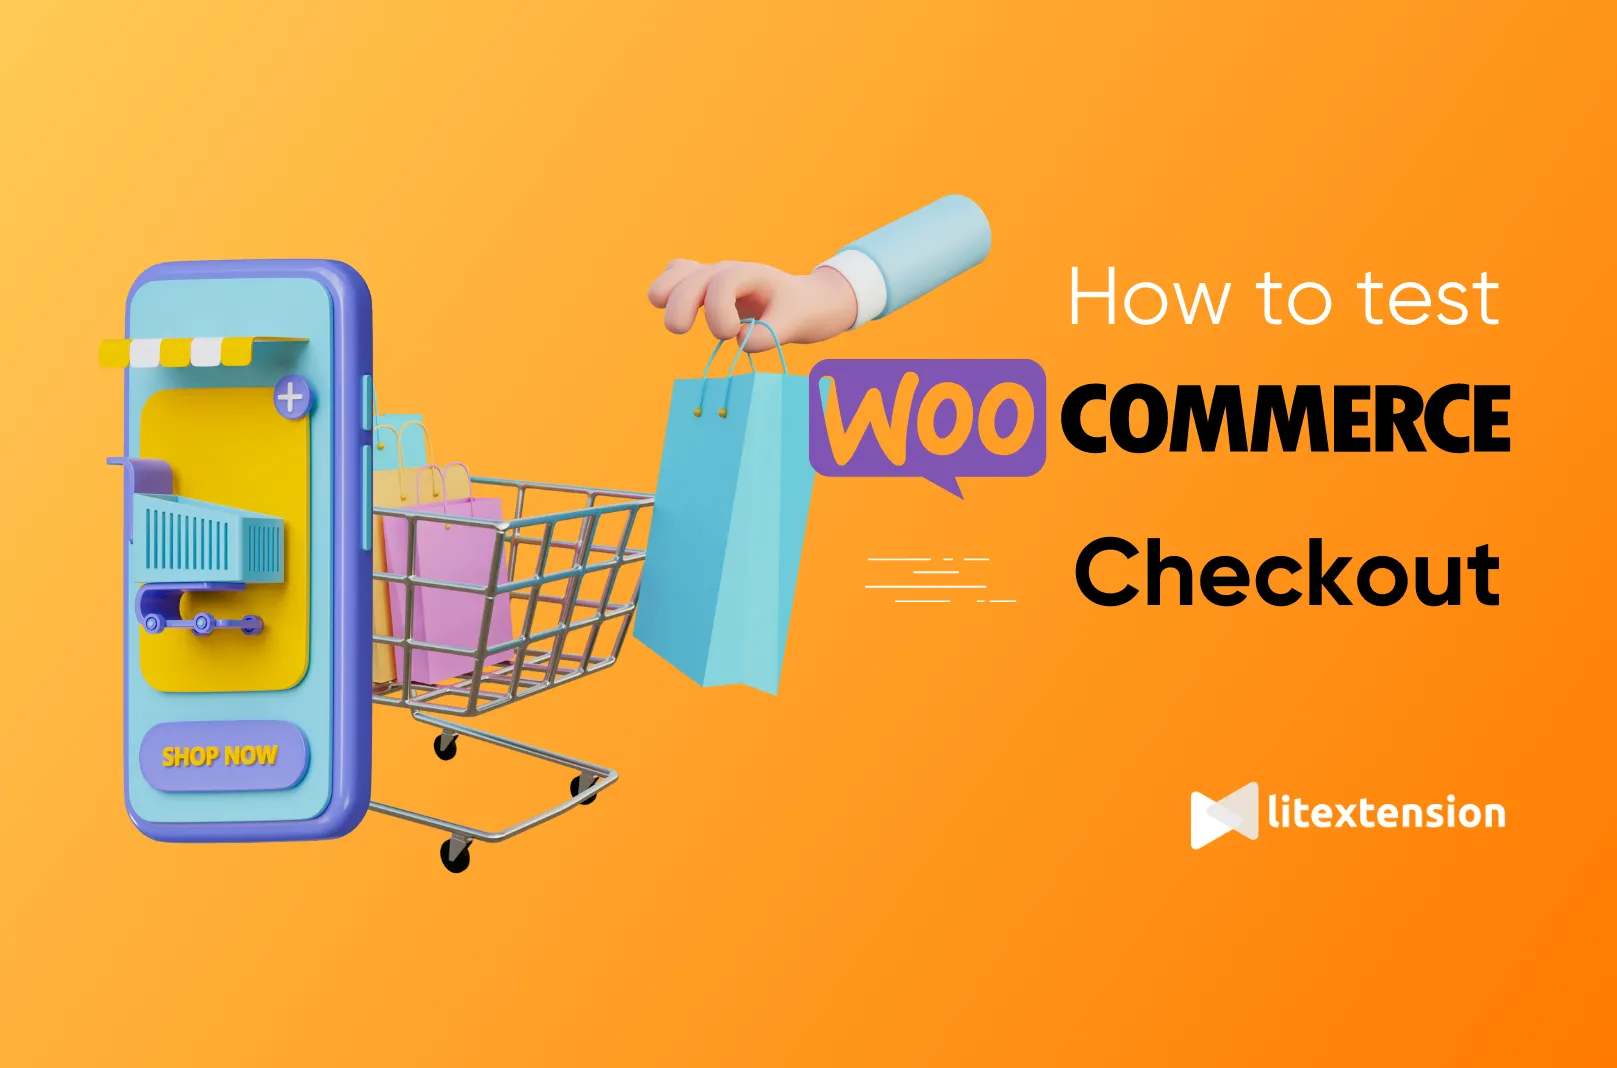 How to set up a one-click or direct checkout in WooCommerce